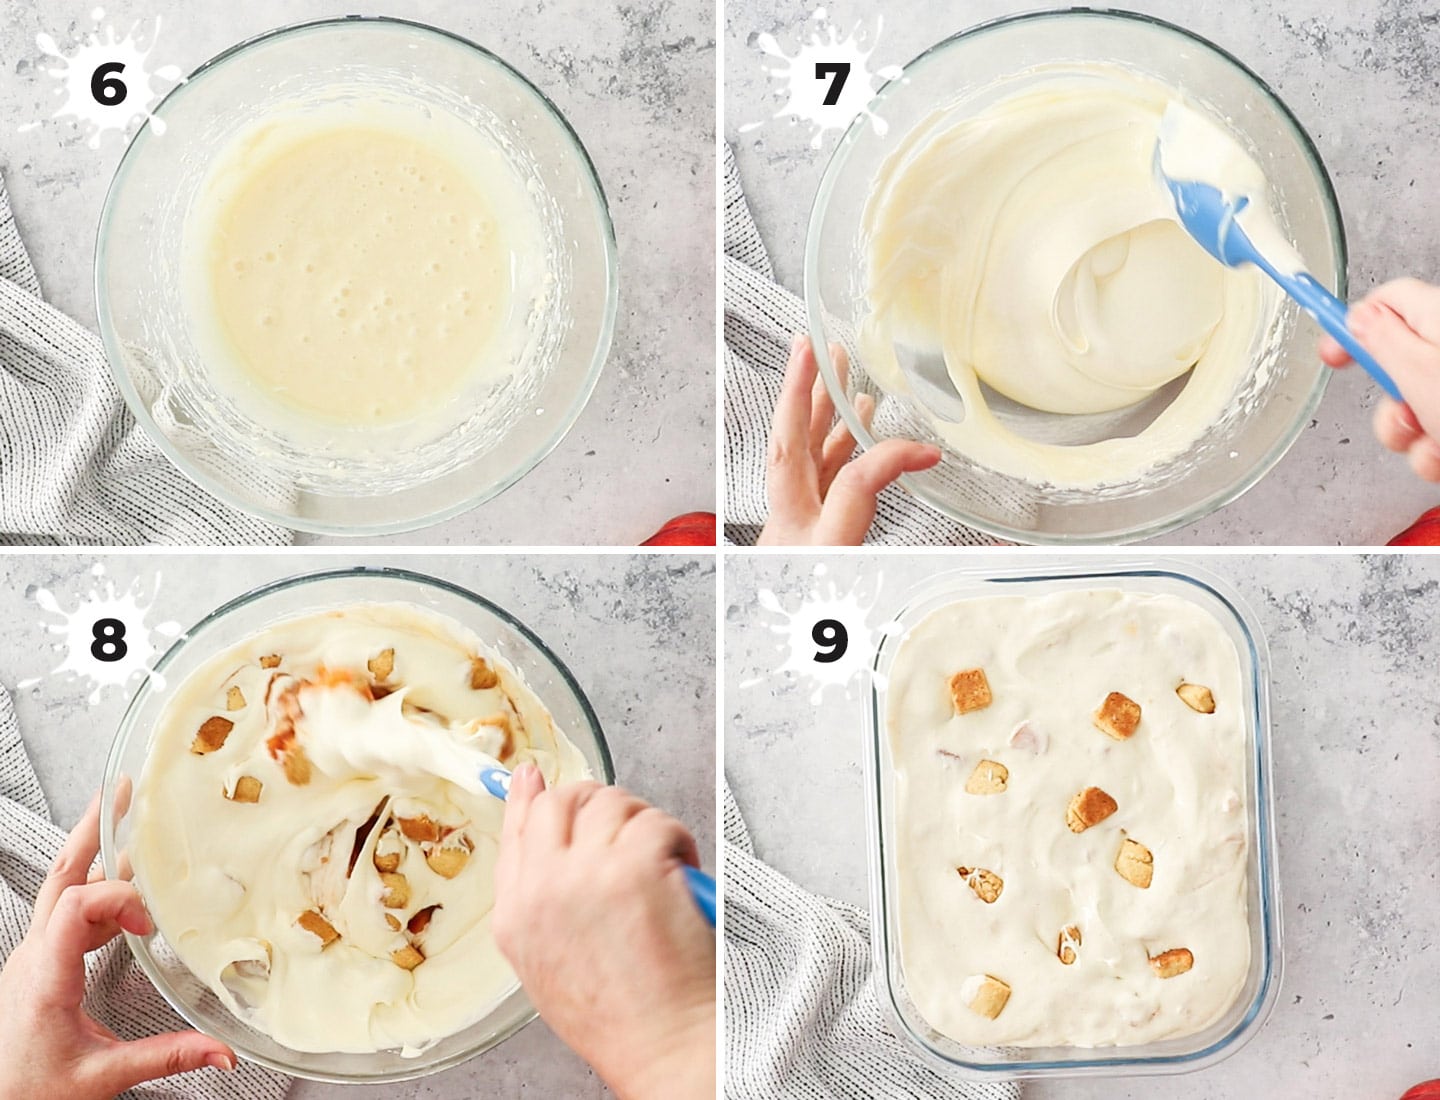 A collage showing how to make and assemble the ice cream.